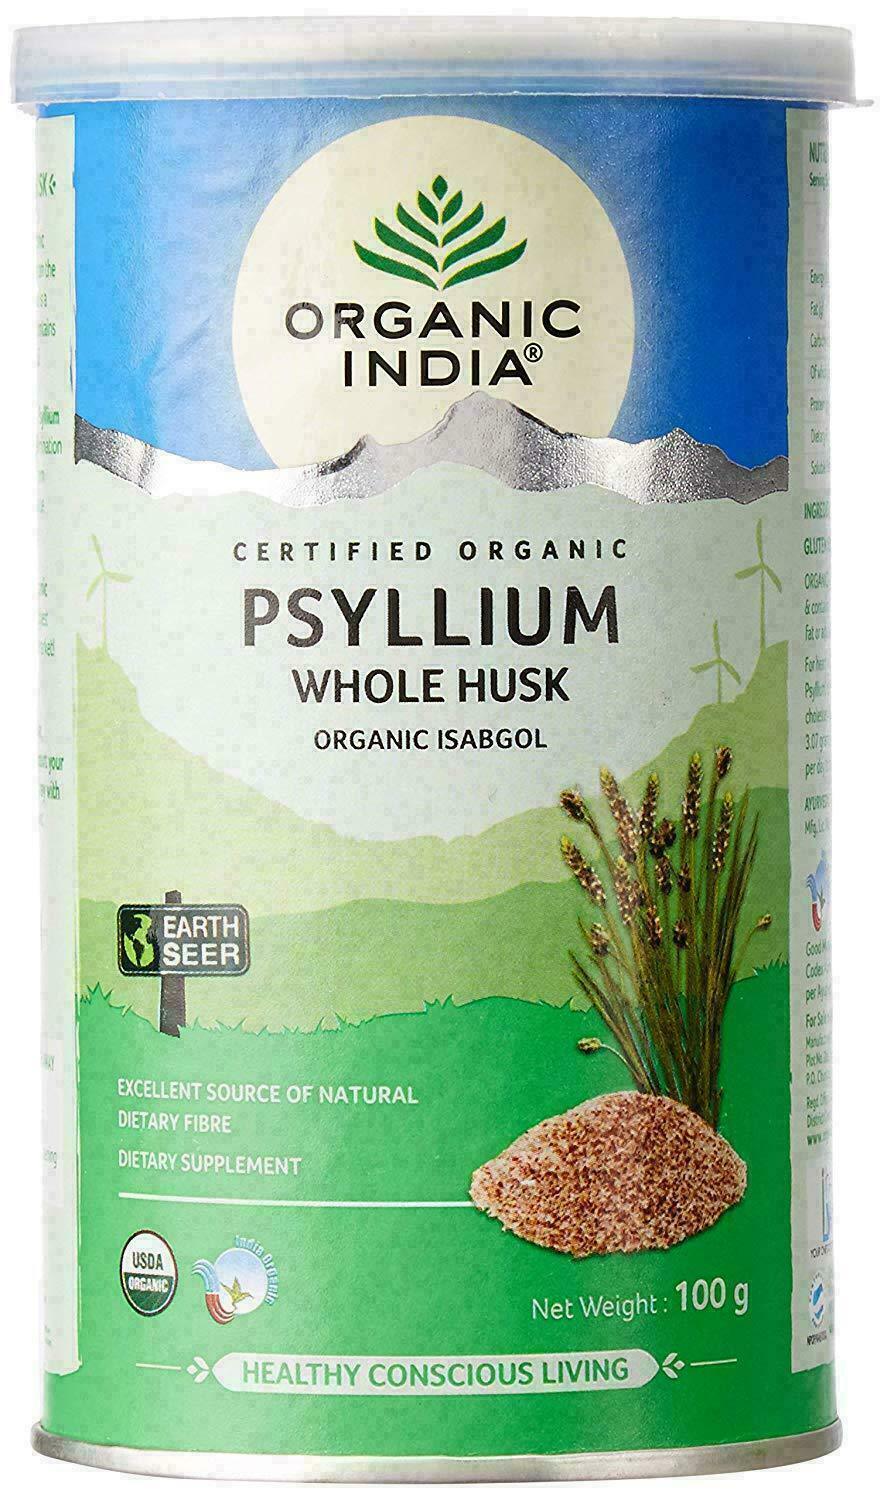 Organic India-Whole Husk Psyllium-constipation, indigestion relief, weight loss